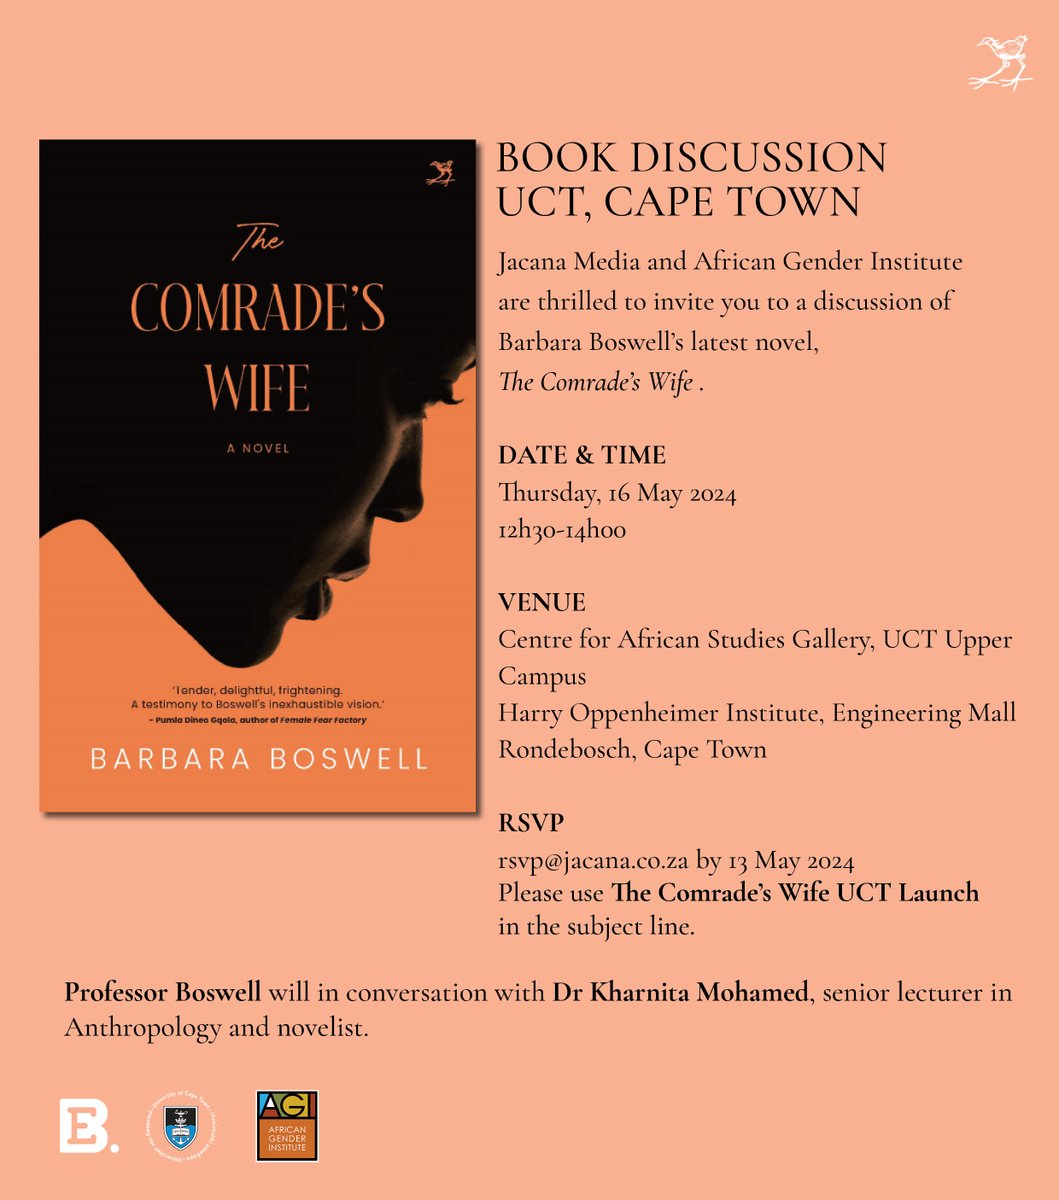 Happening tomorrow! Professor Barbara Boswell discusses her latest book, The Comrade’s Wife, with @KharMoh. 📍Centre for African Studies Gallery, UCT. 📆Thursday, 16th May. ⏰12:30 -14:00 Make sure to secure your seat now! See you there 😉#Launch #TheComradesWife